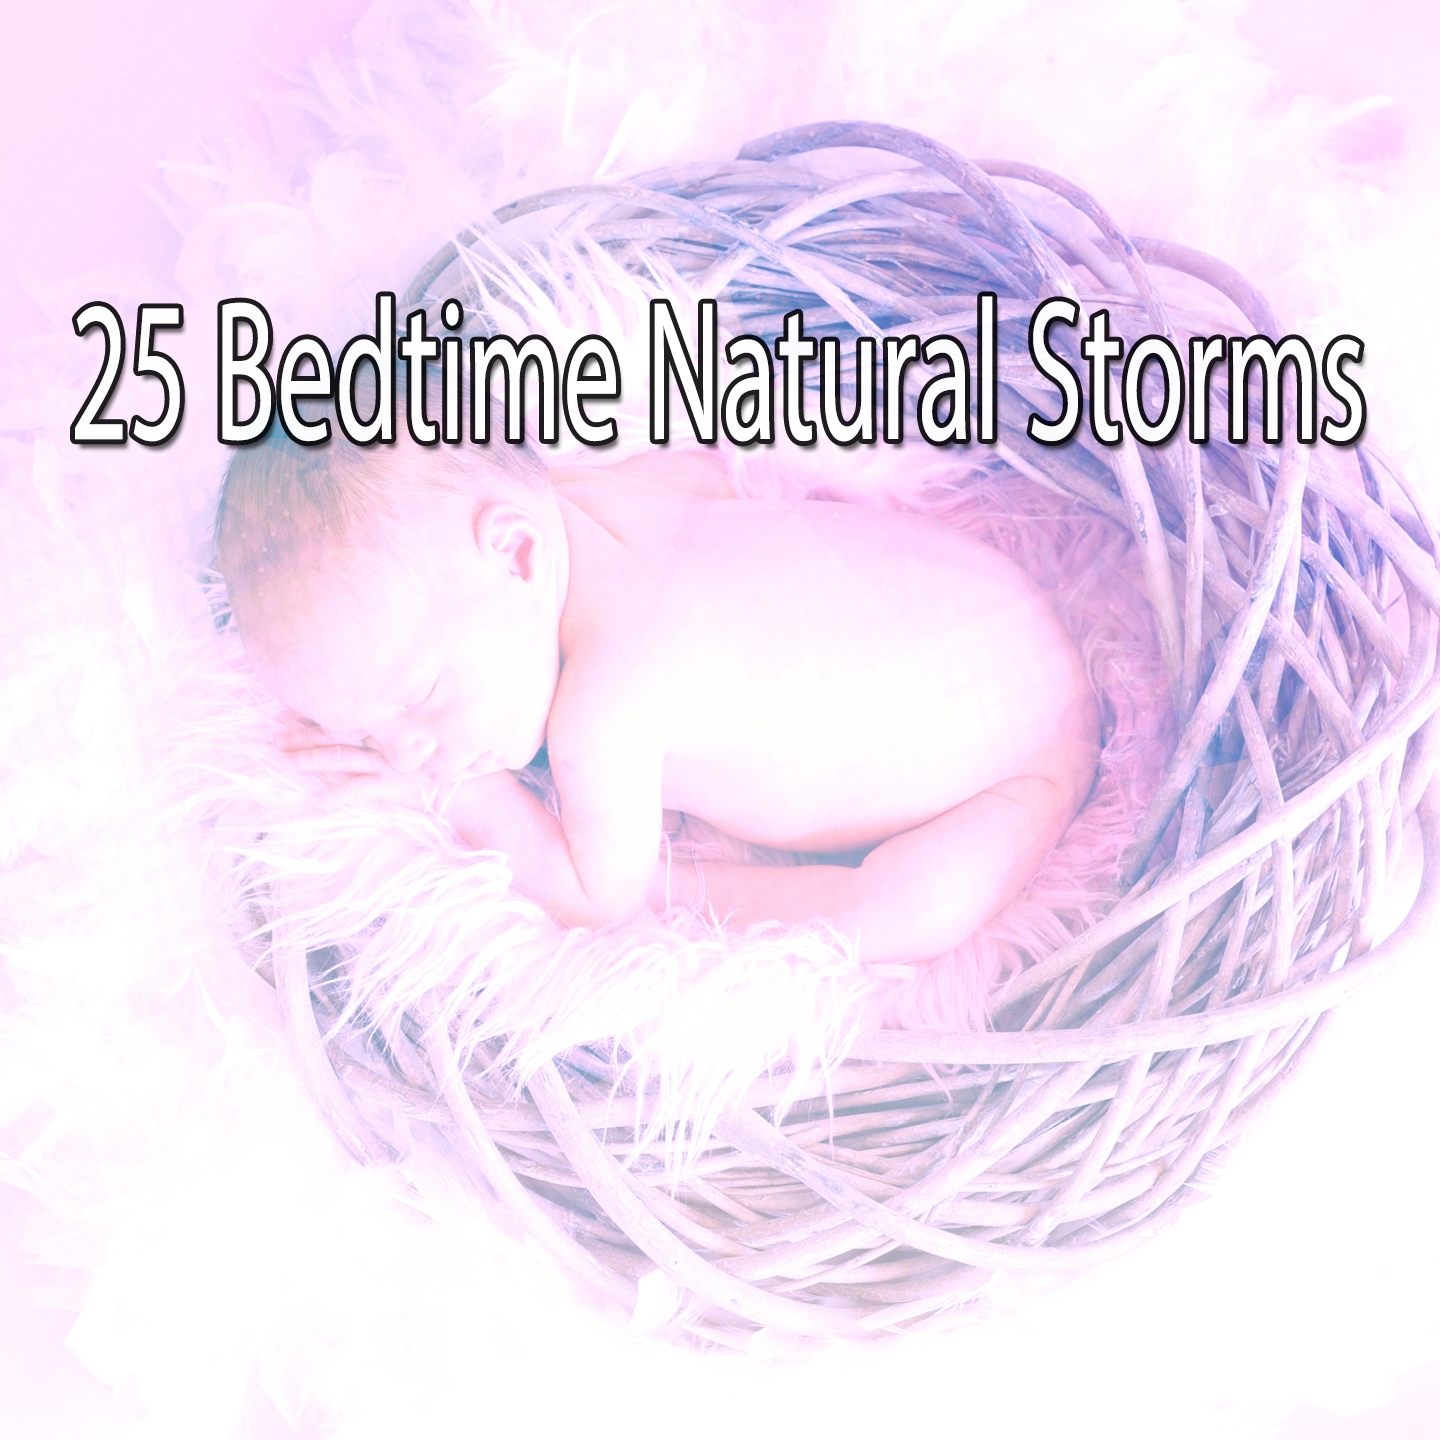 25 Bedtime Natural Storms